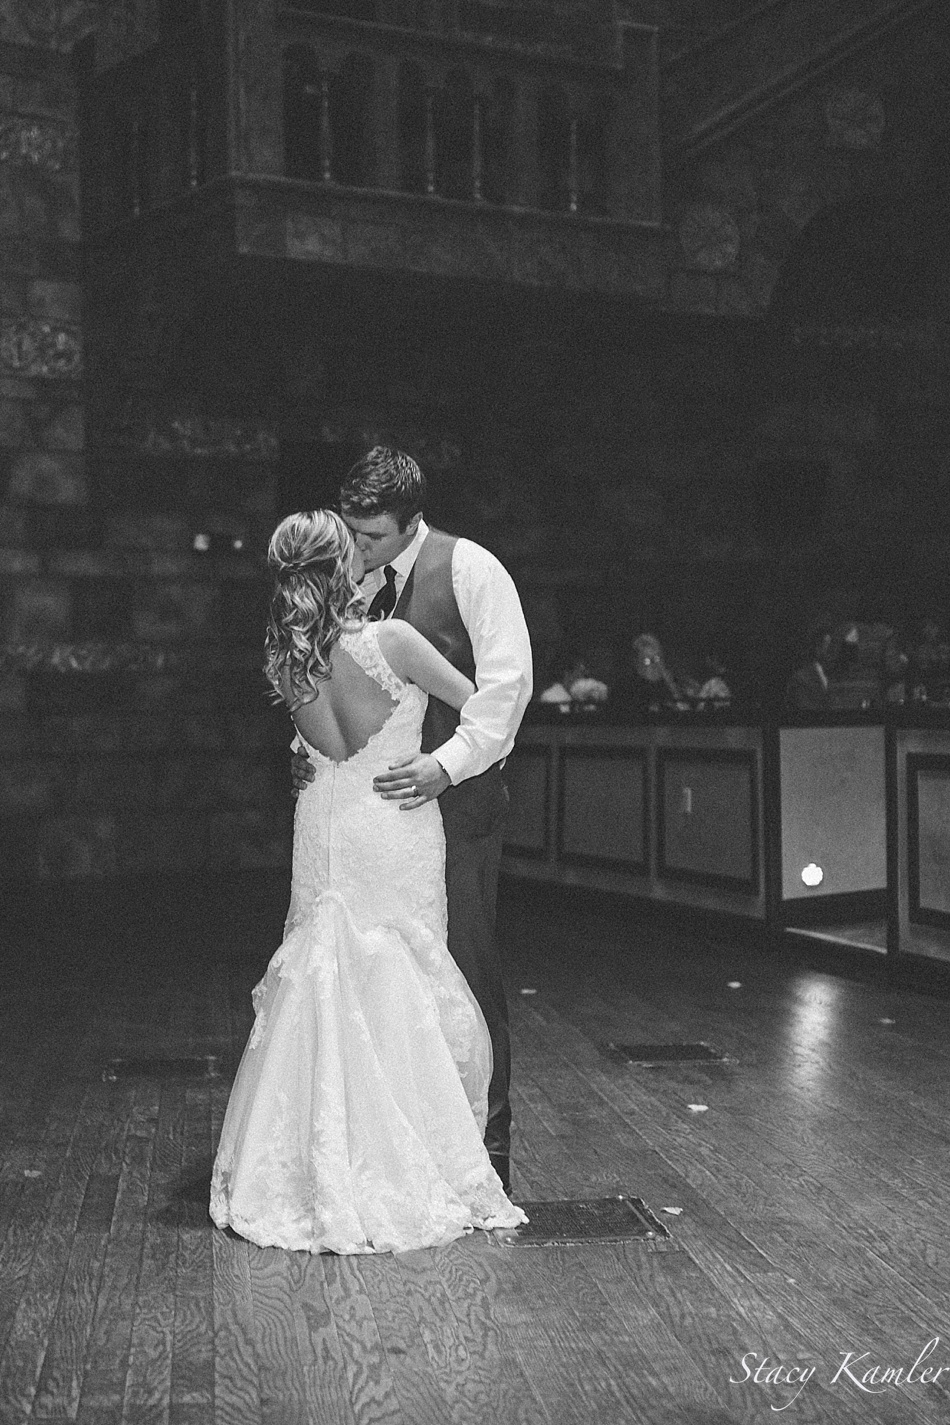 First Dance at the Rococo Theater